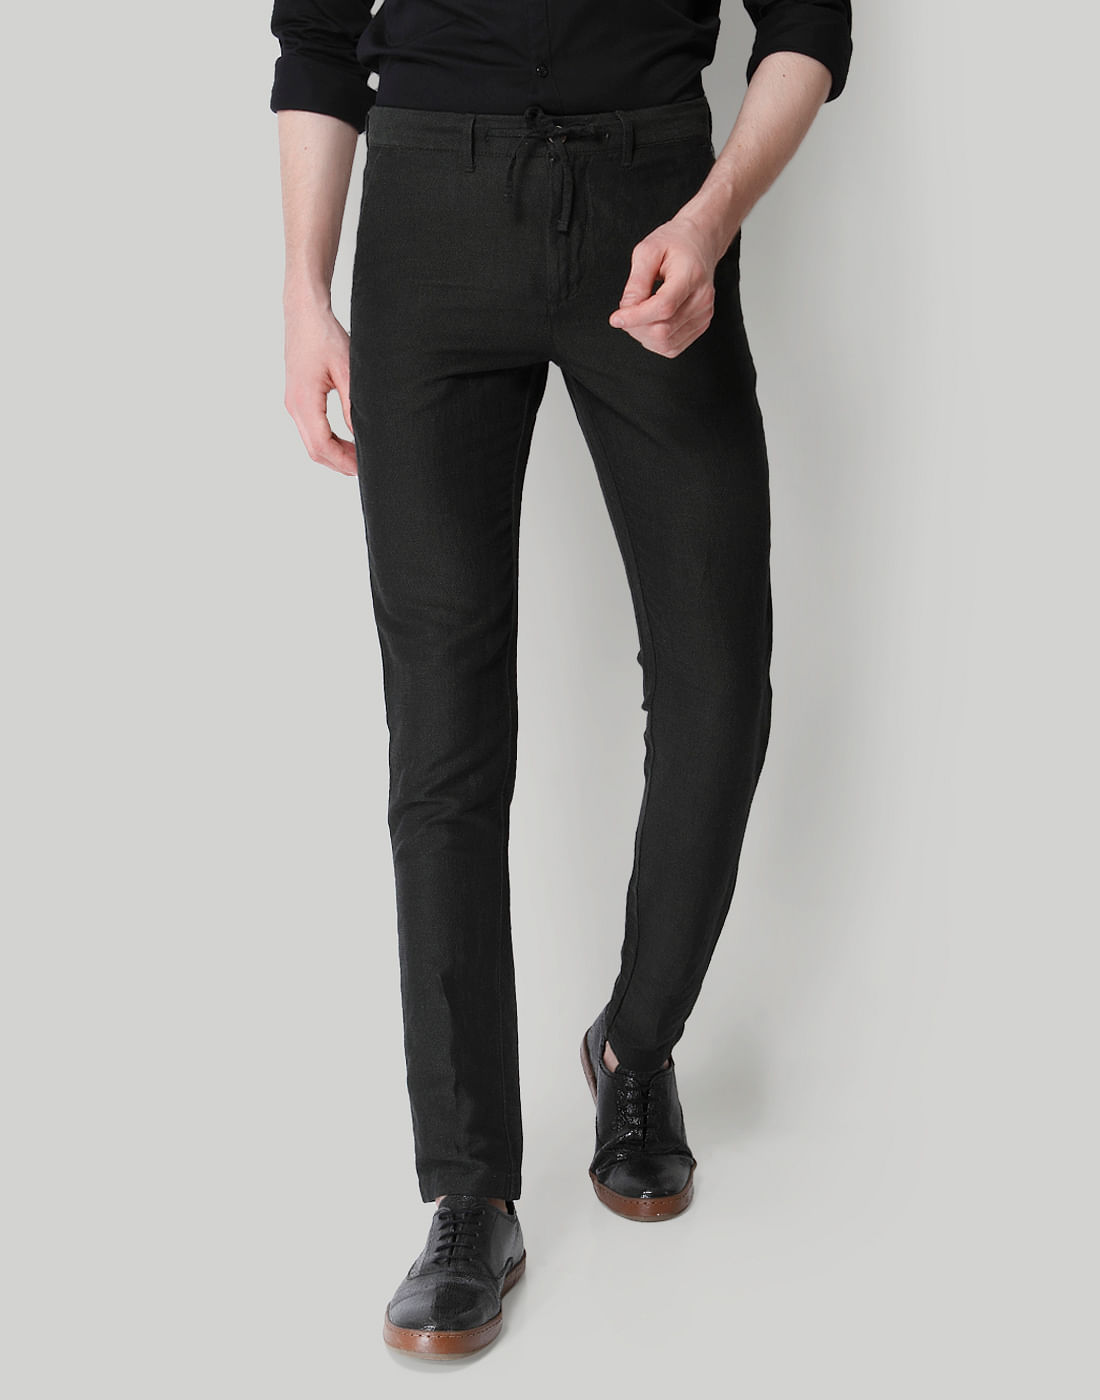 Womens Pants  New Collection Online  ZARA United States  กางเกง